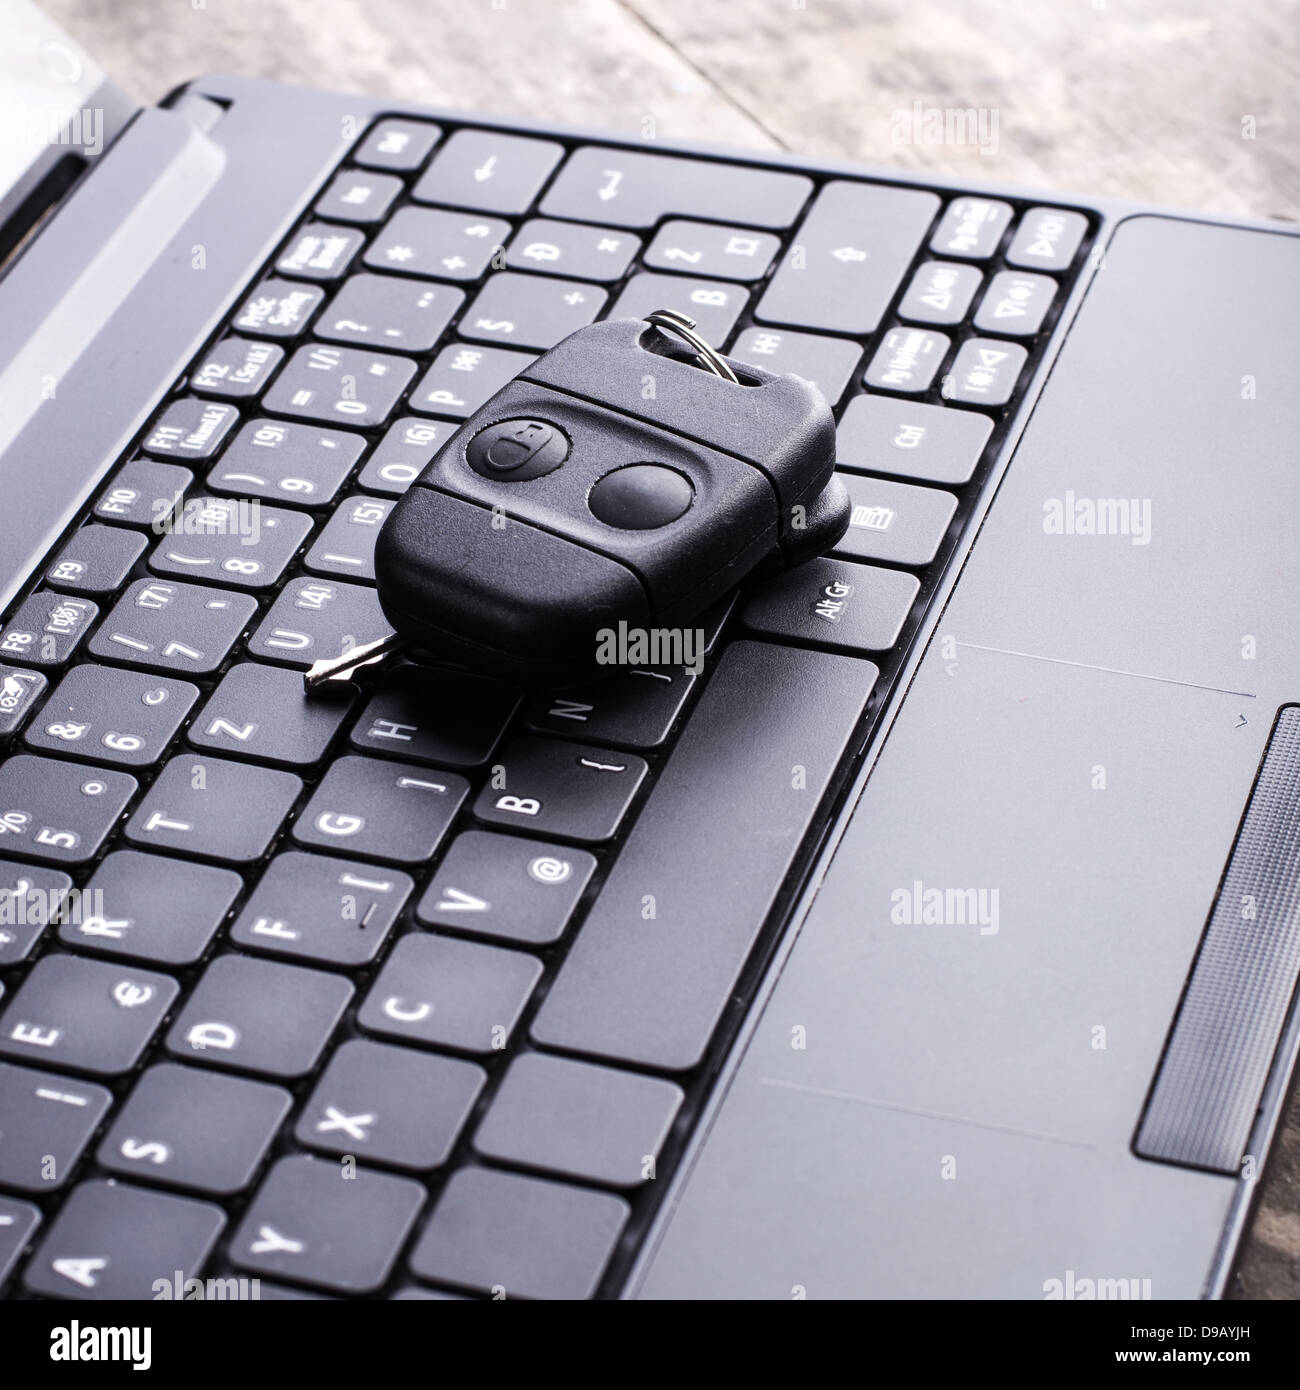 Car remote key and laptop in close up Stock Photo